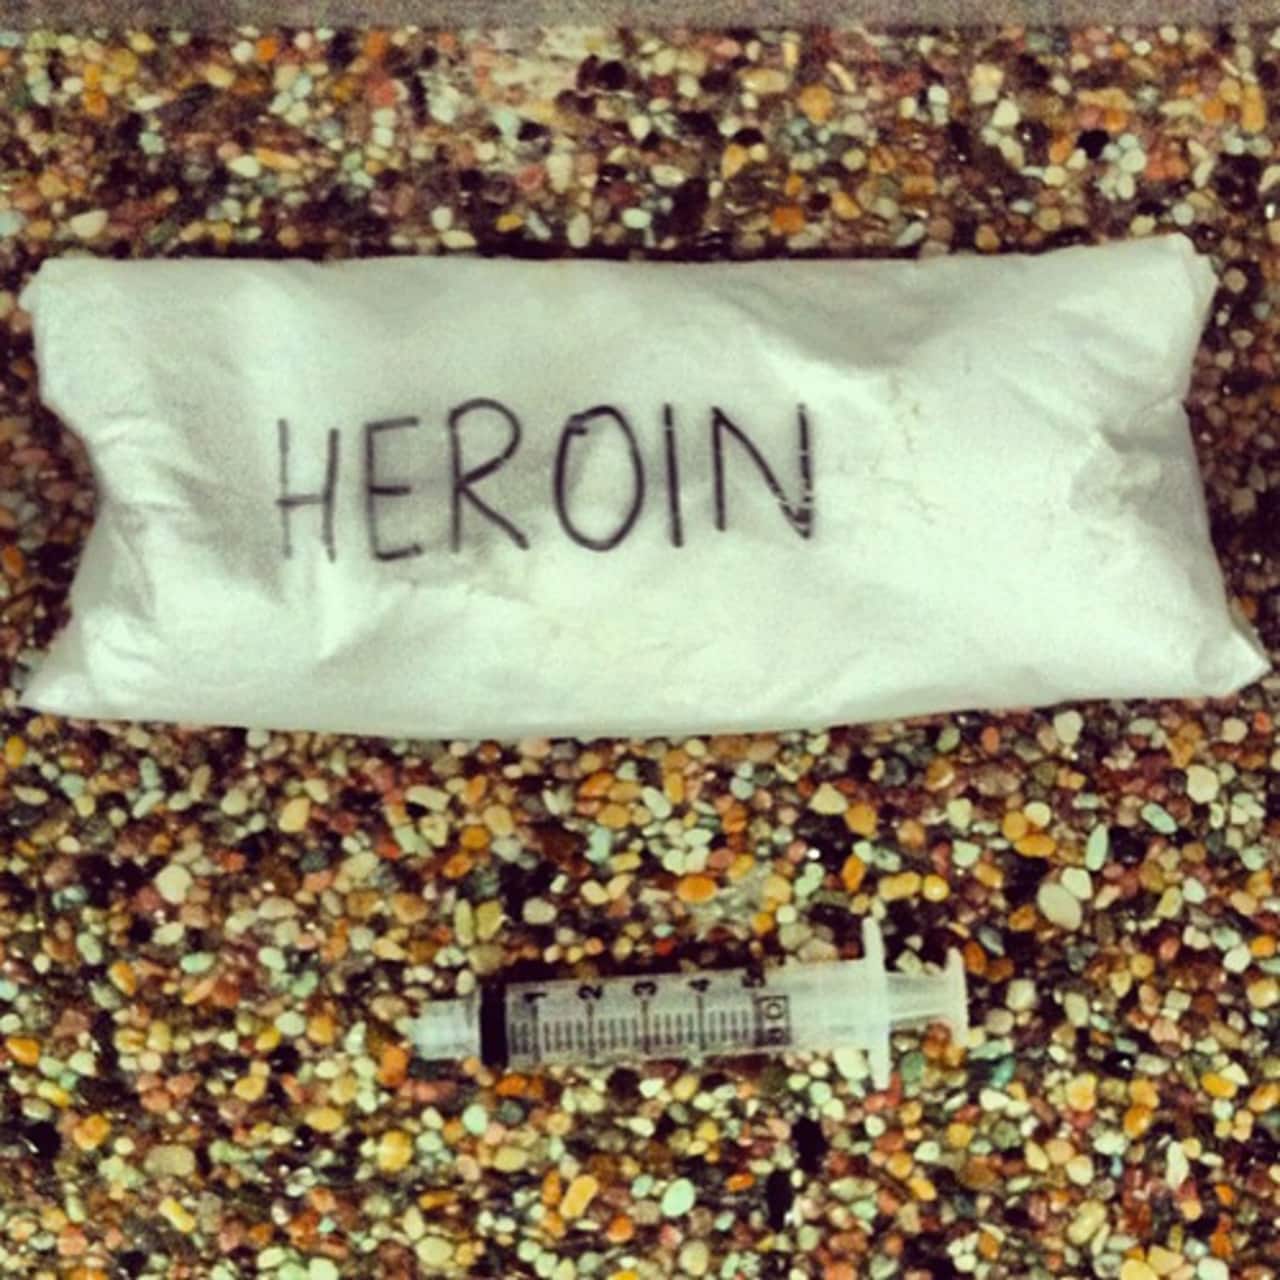 Health officials are concerned that a new type of heroin laced with elephant tranquilizers that has been detected in the Midwest could head for Westchester and the Hudson Valley.